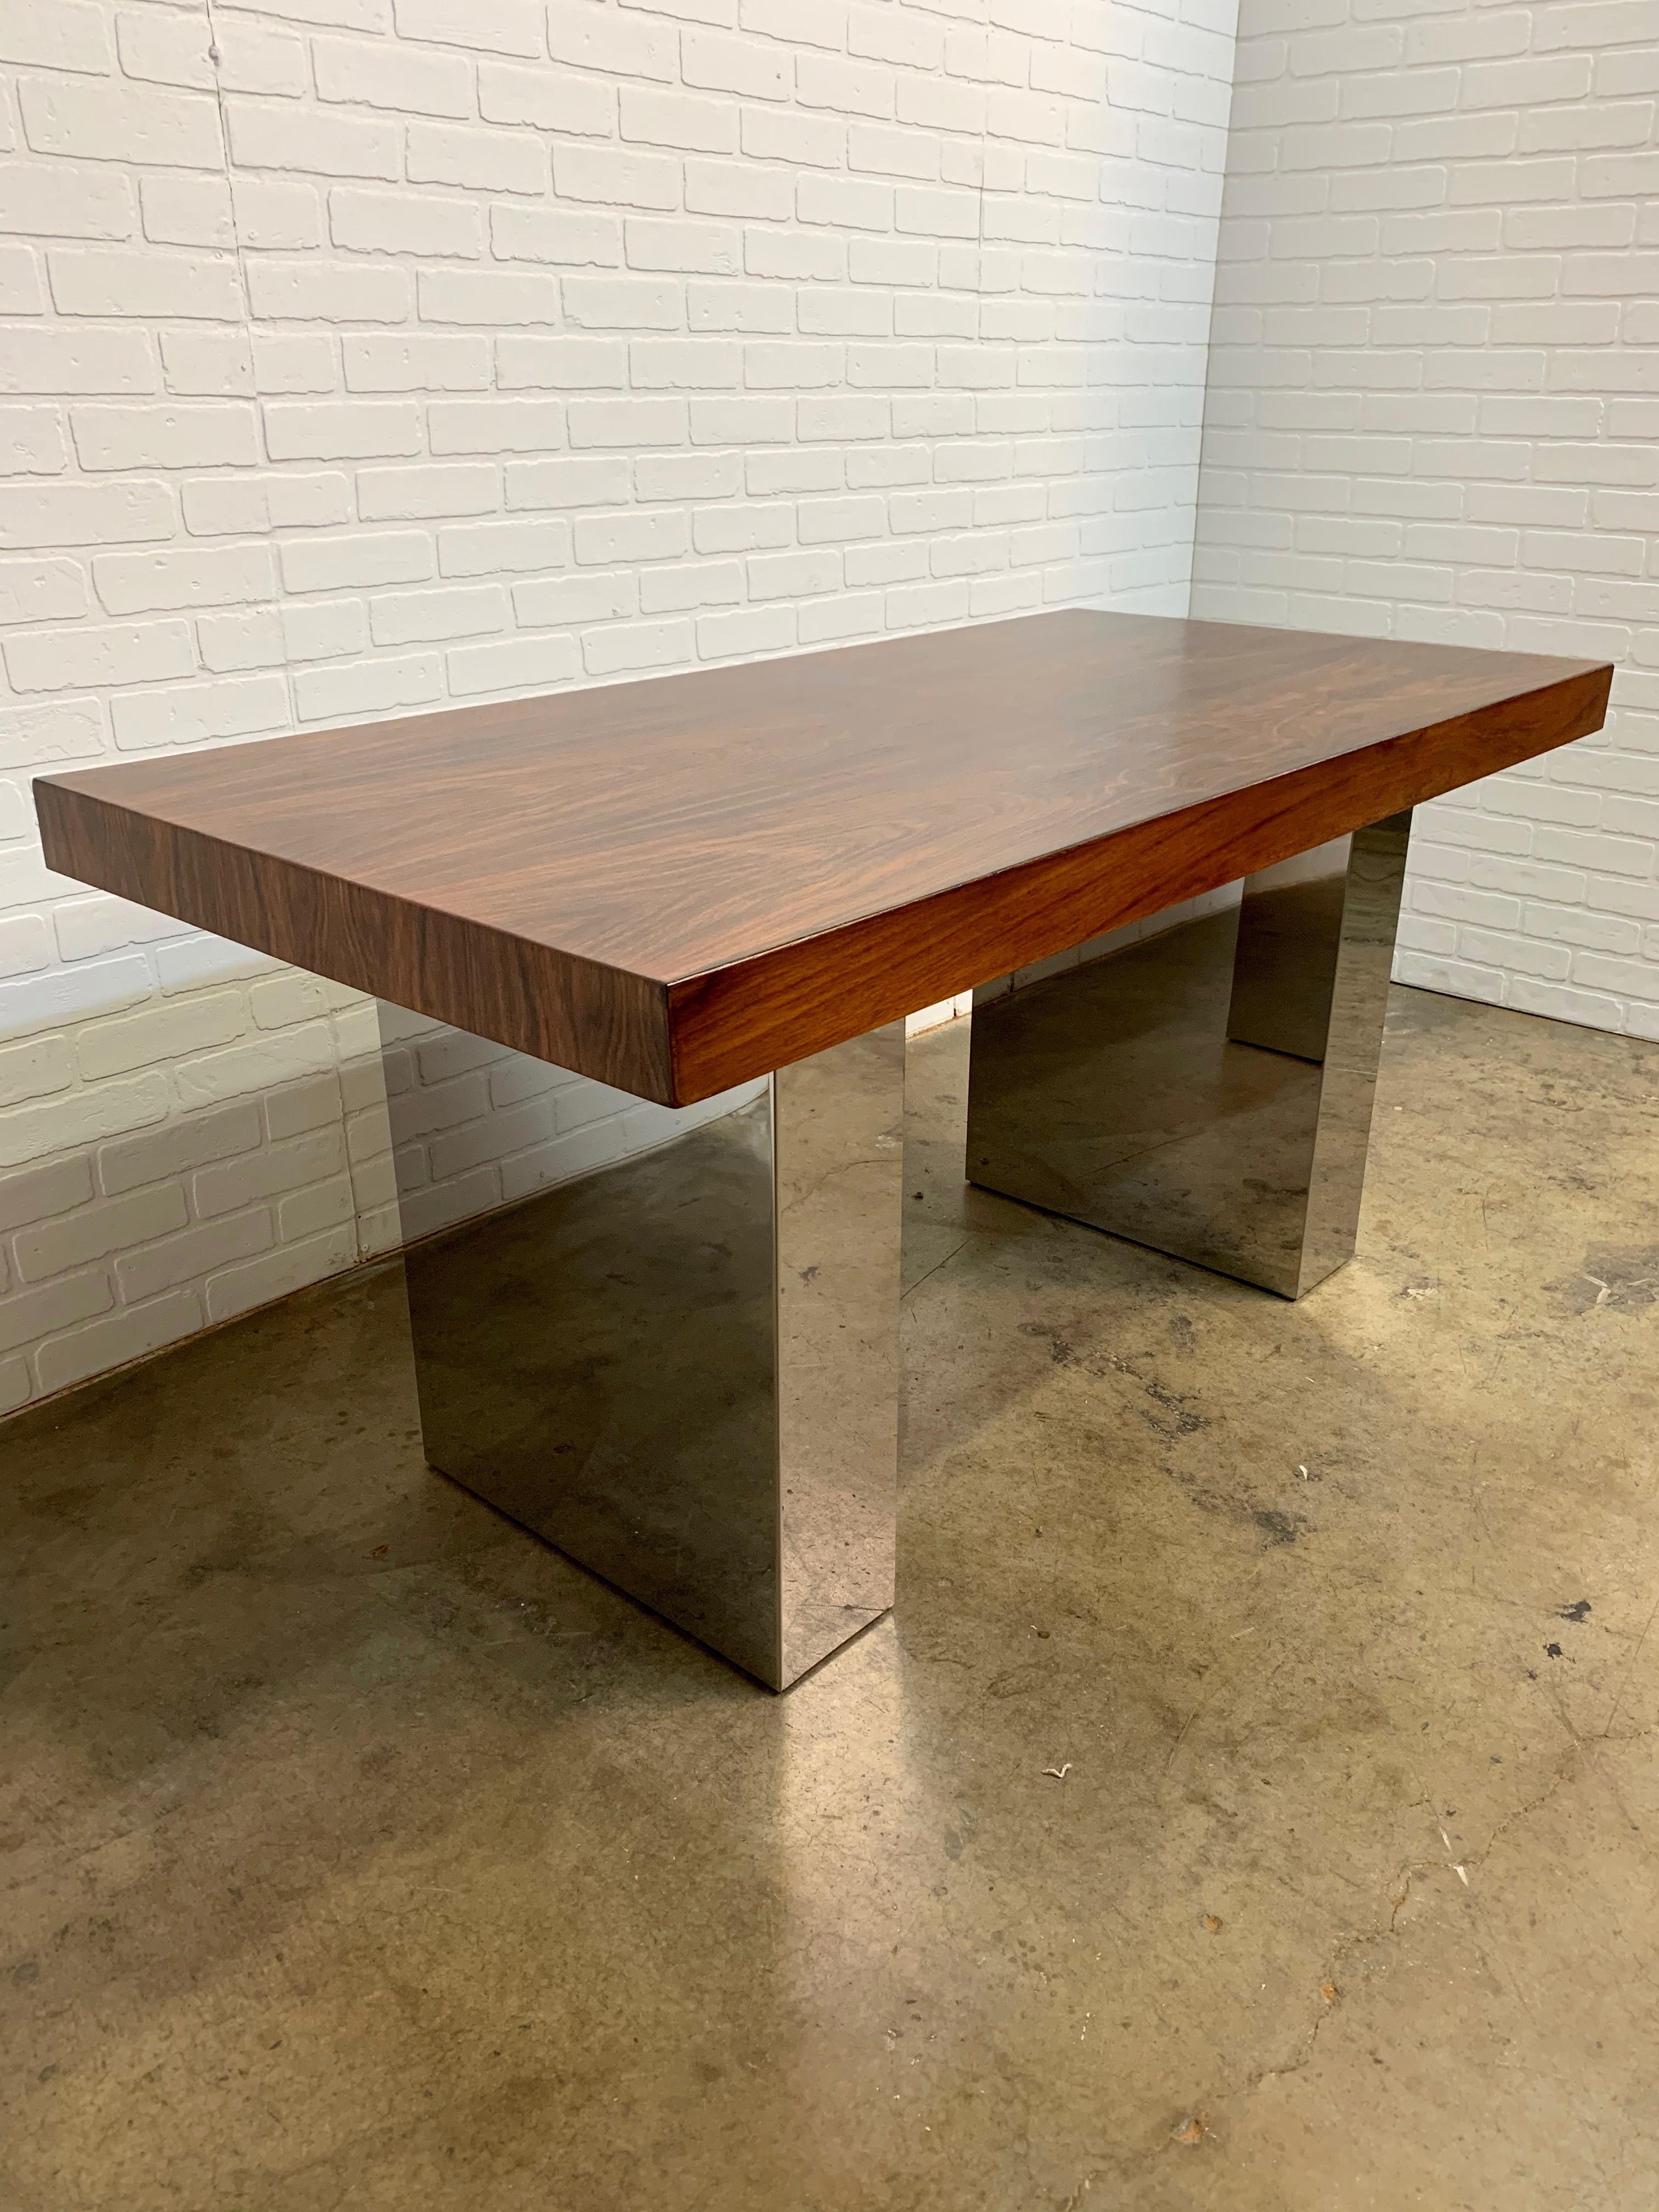 Rosewood with chrome pedestal base library table that can be used as a dining table or foyer table or desk.